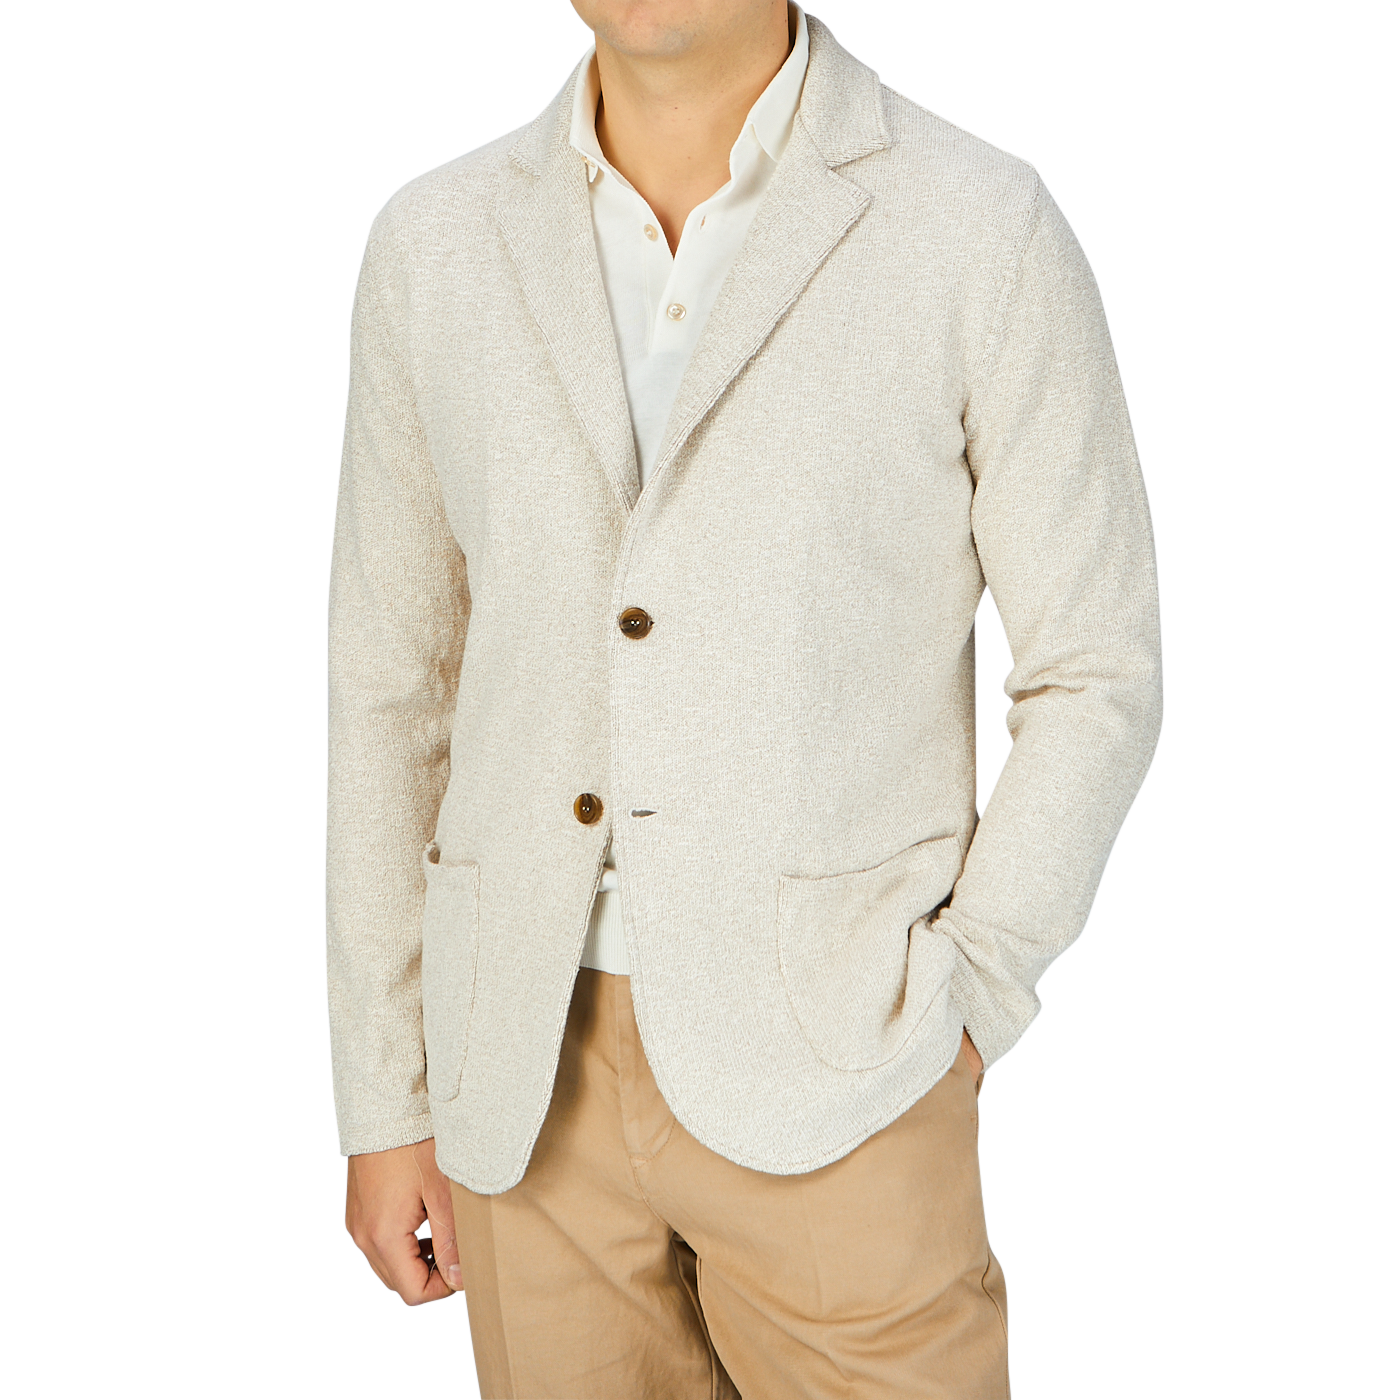 A man wearing a Light Brown Cotton Mouline Swacket by Maurizio Baldassari and tan pants.